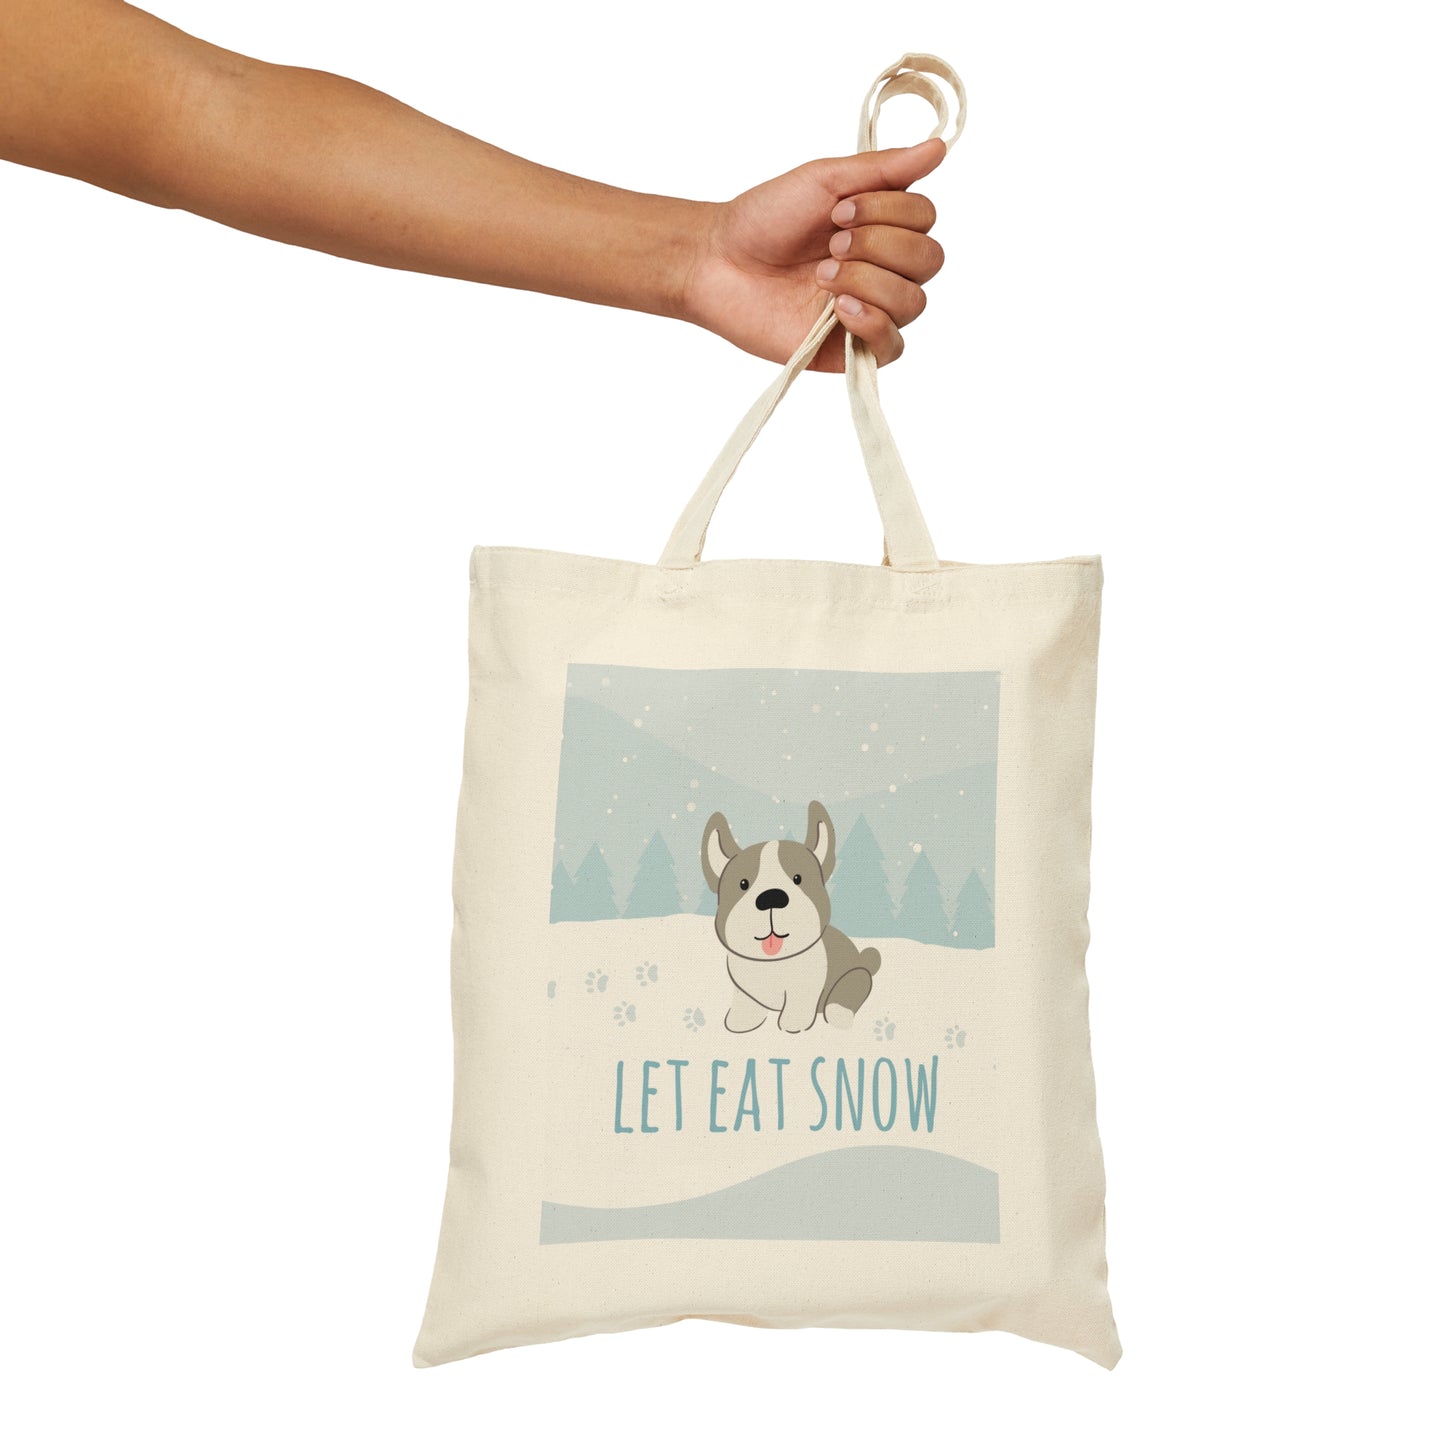 Let Eat Snow Cute Dog Anime Snow Canvas Shopping Cotton Tote Bag